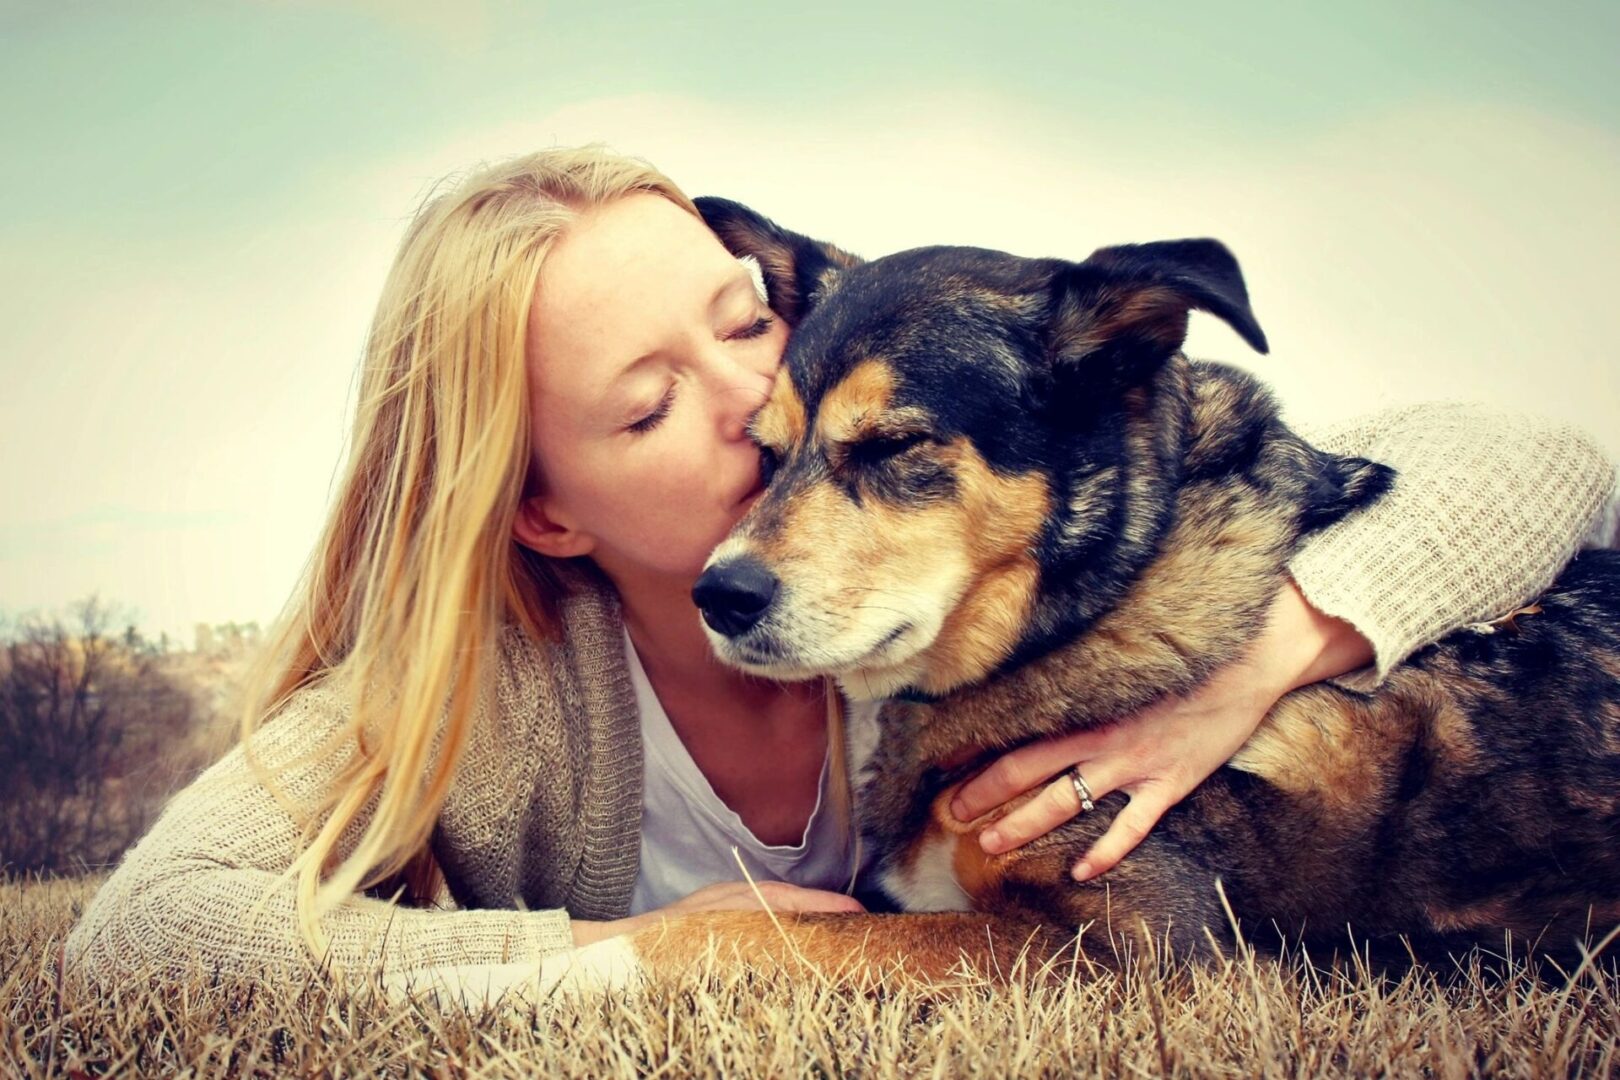 A woman kissing her dog on the nose.